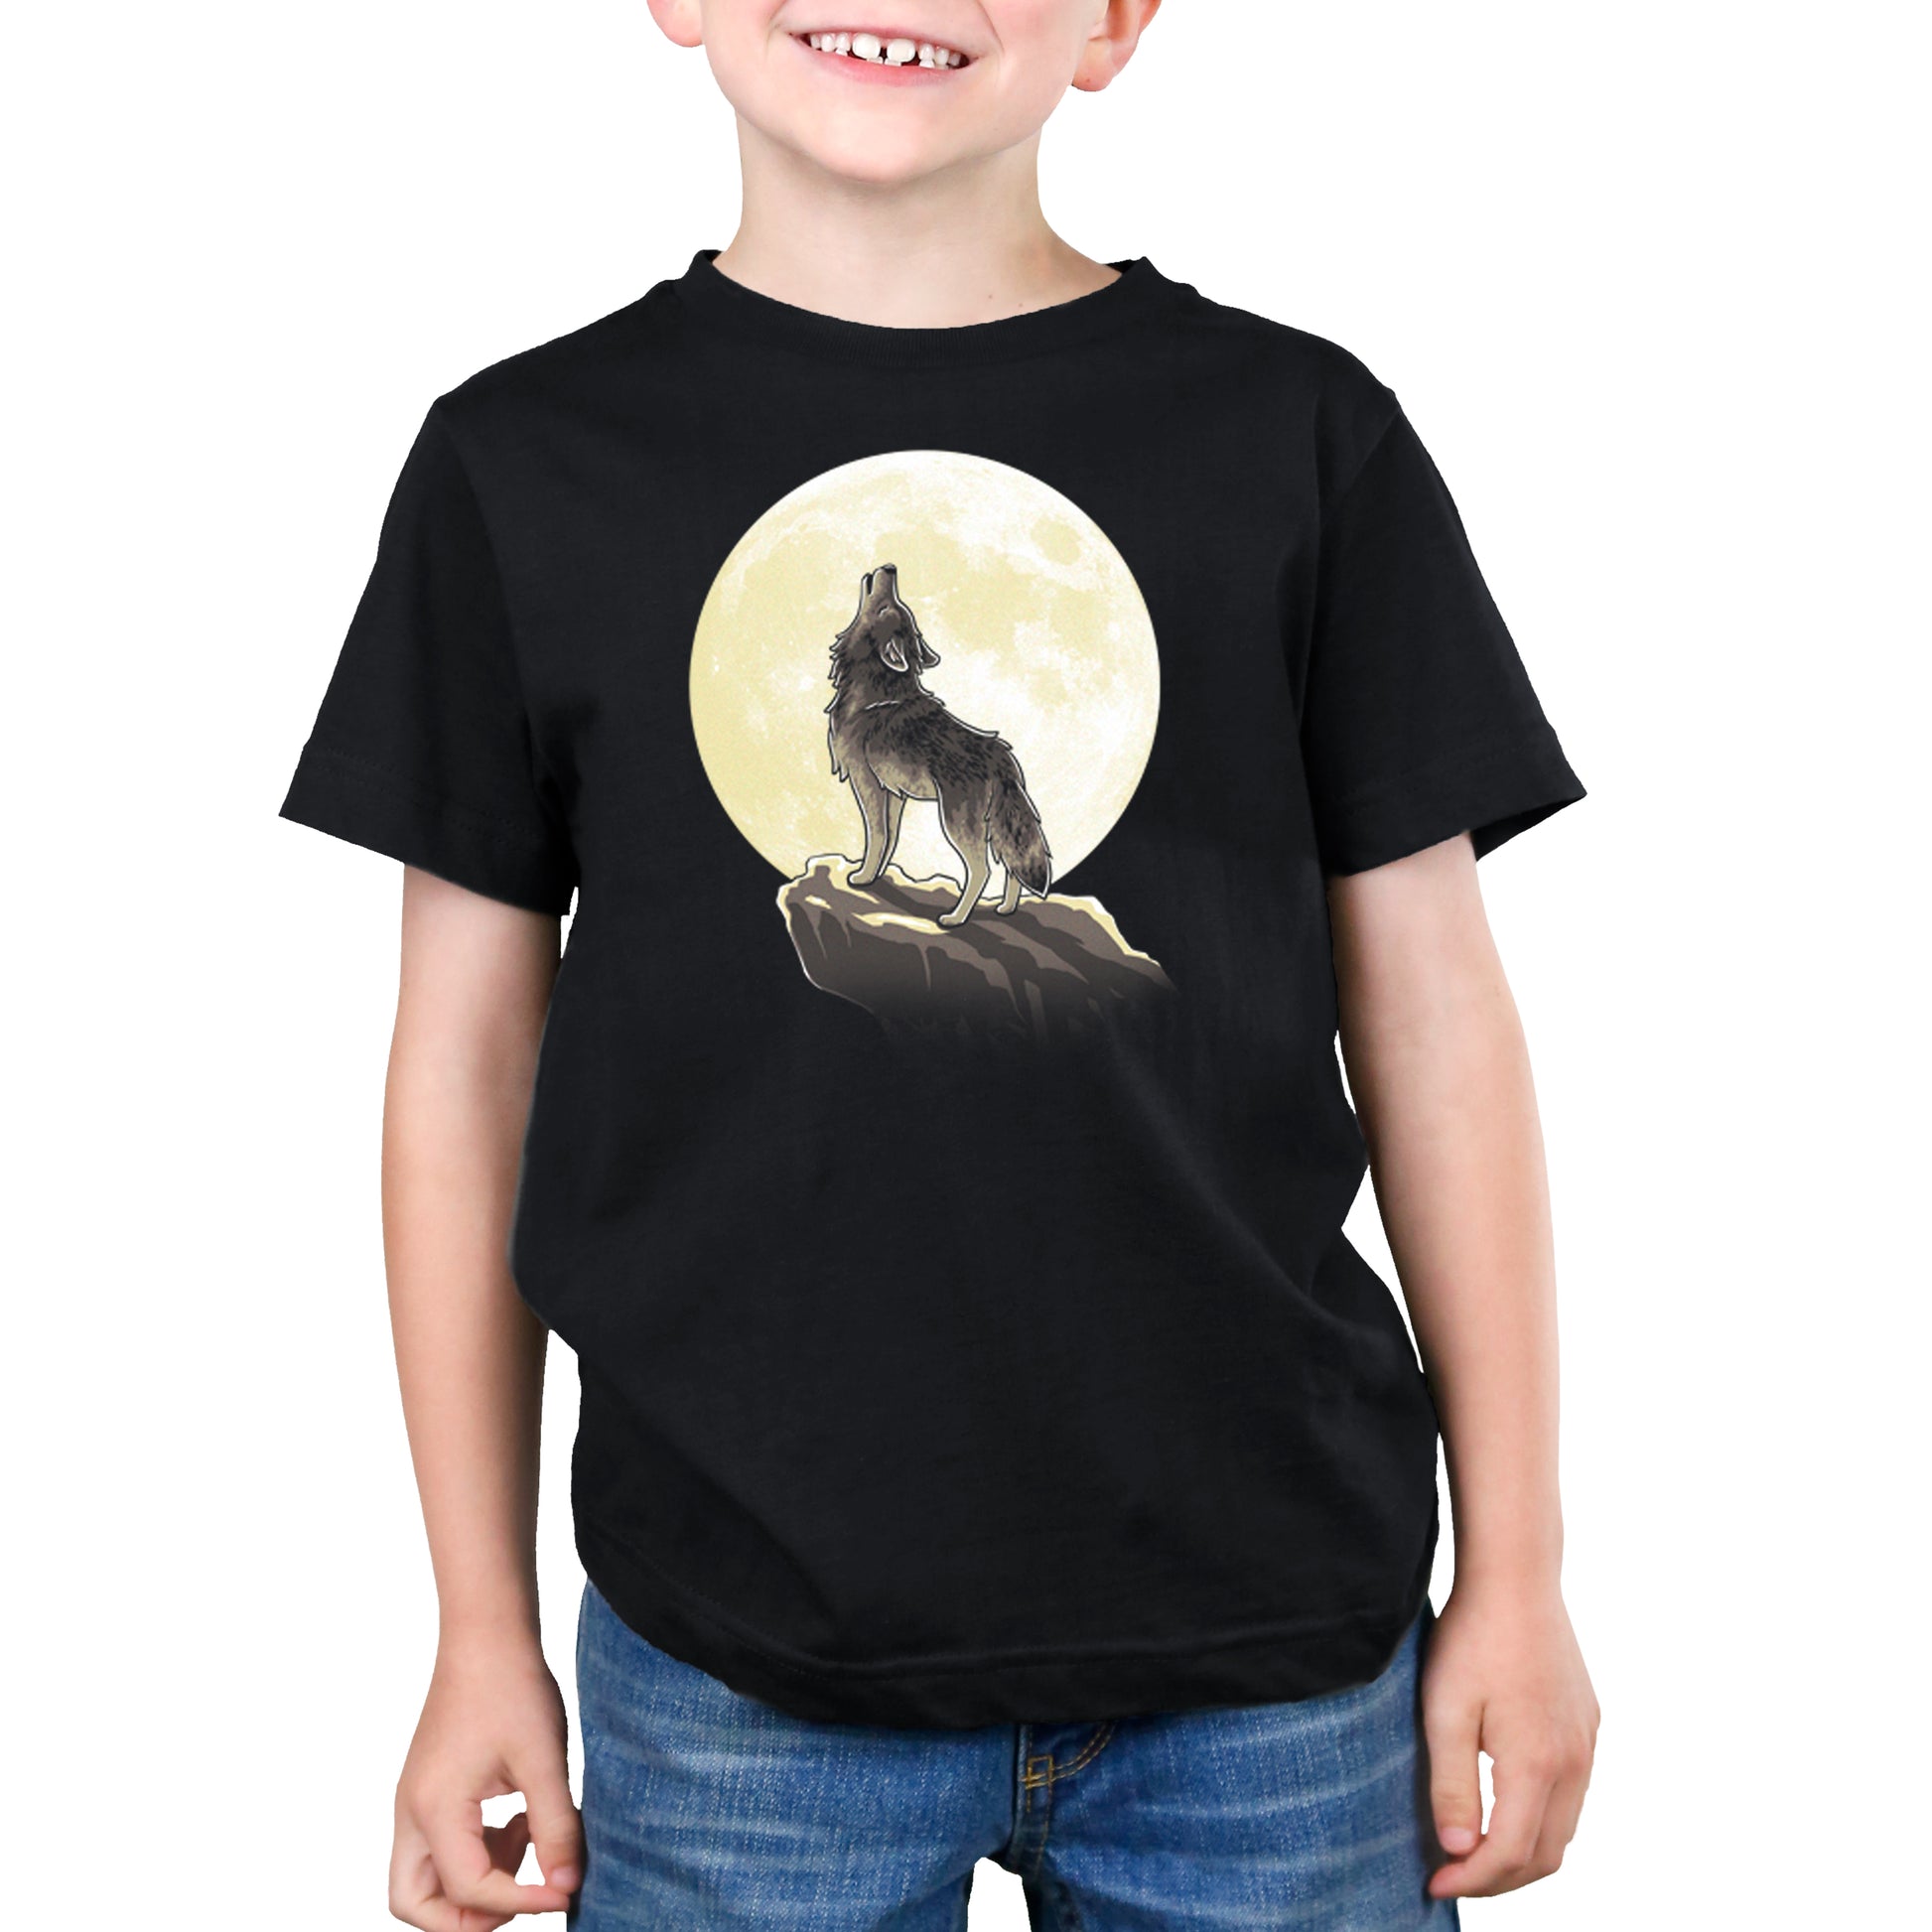 A boy wearing a TeeTurtle Howl at the Moon black t-shirt.